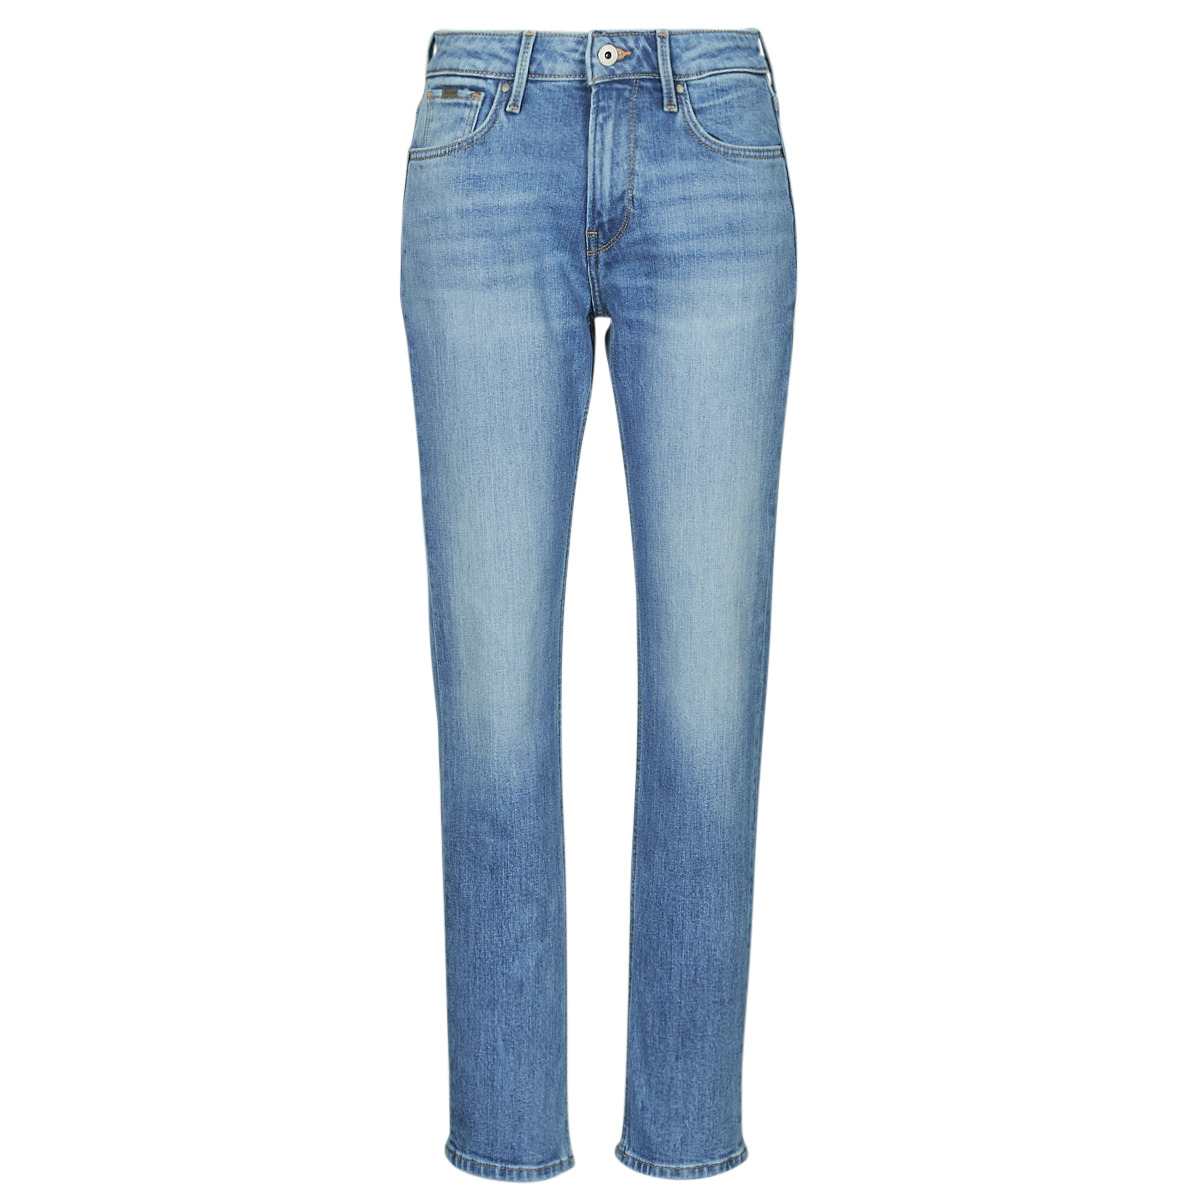 Pepe jeans  Tζιν σε ίσια γραμή Pepe jeans STRAIGHT JEANS HW